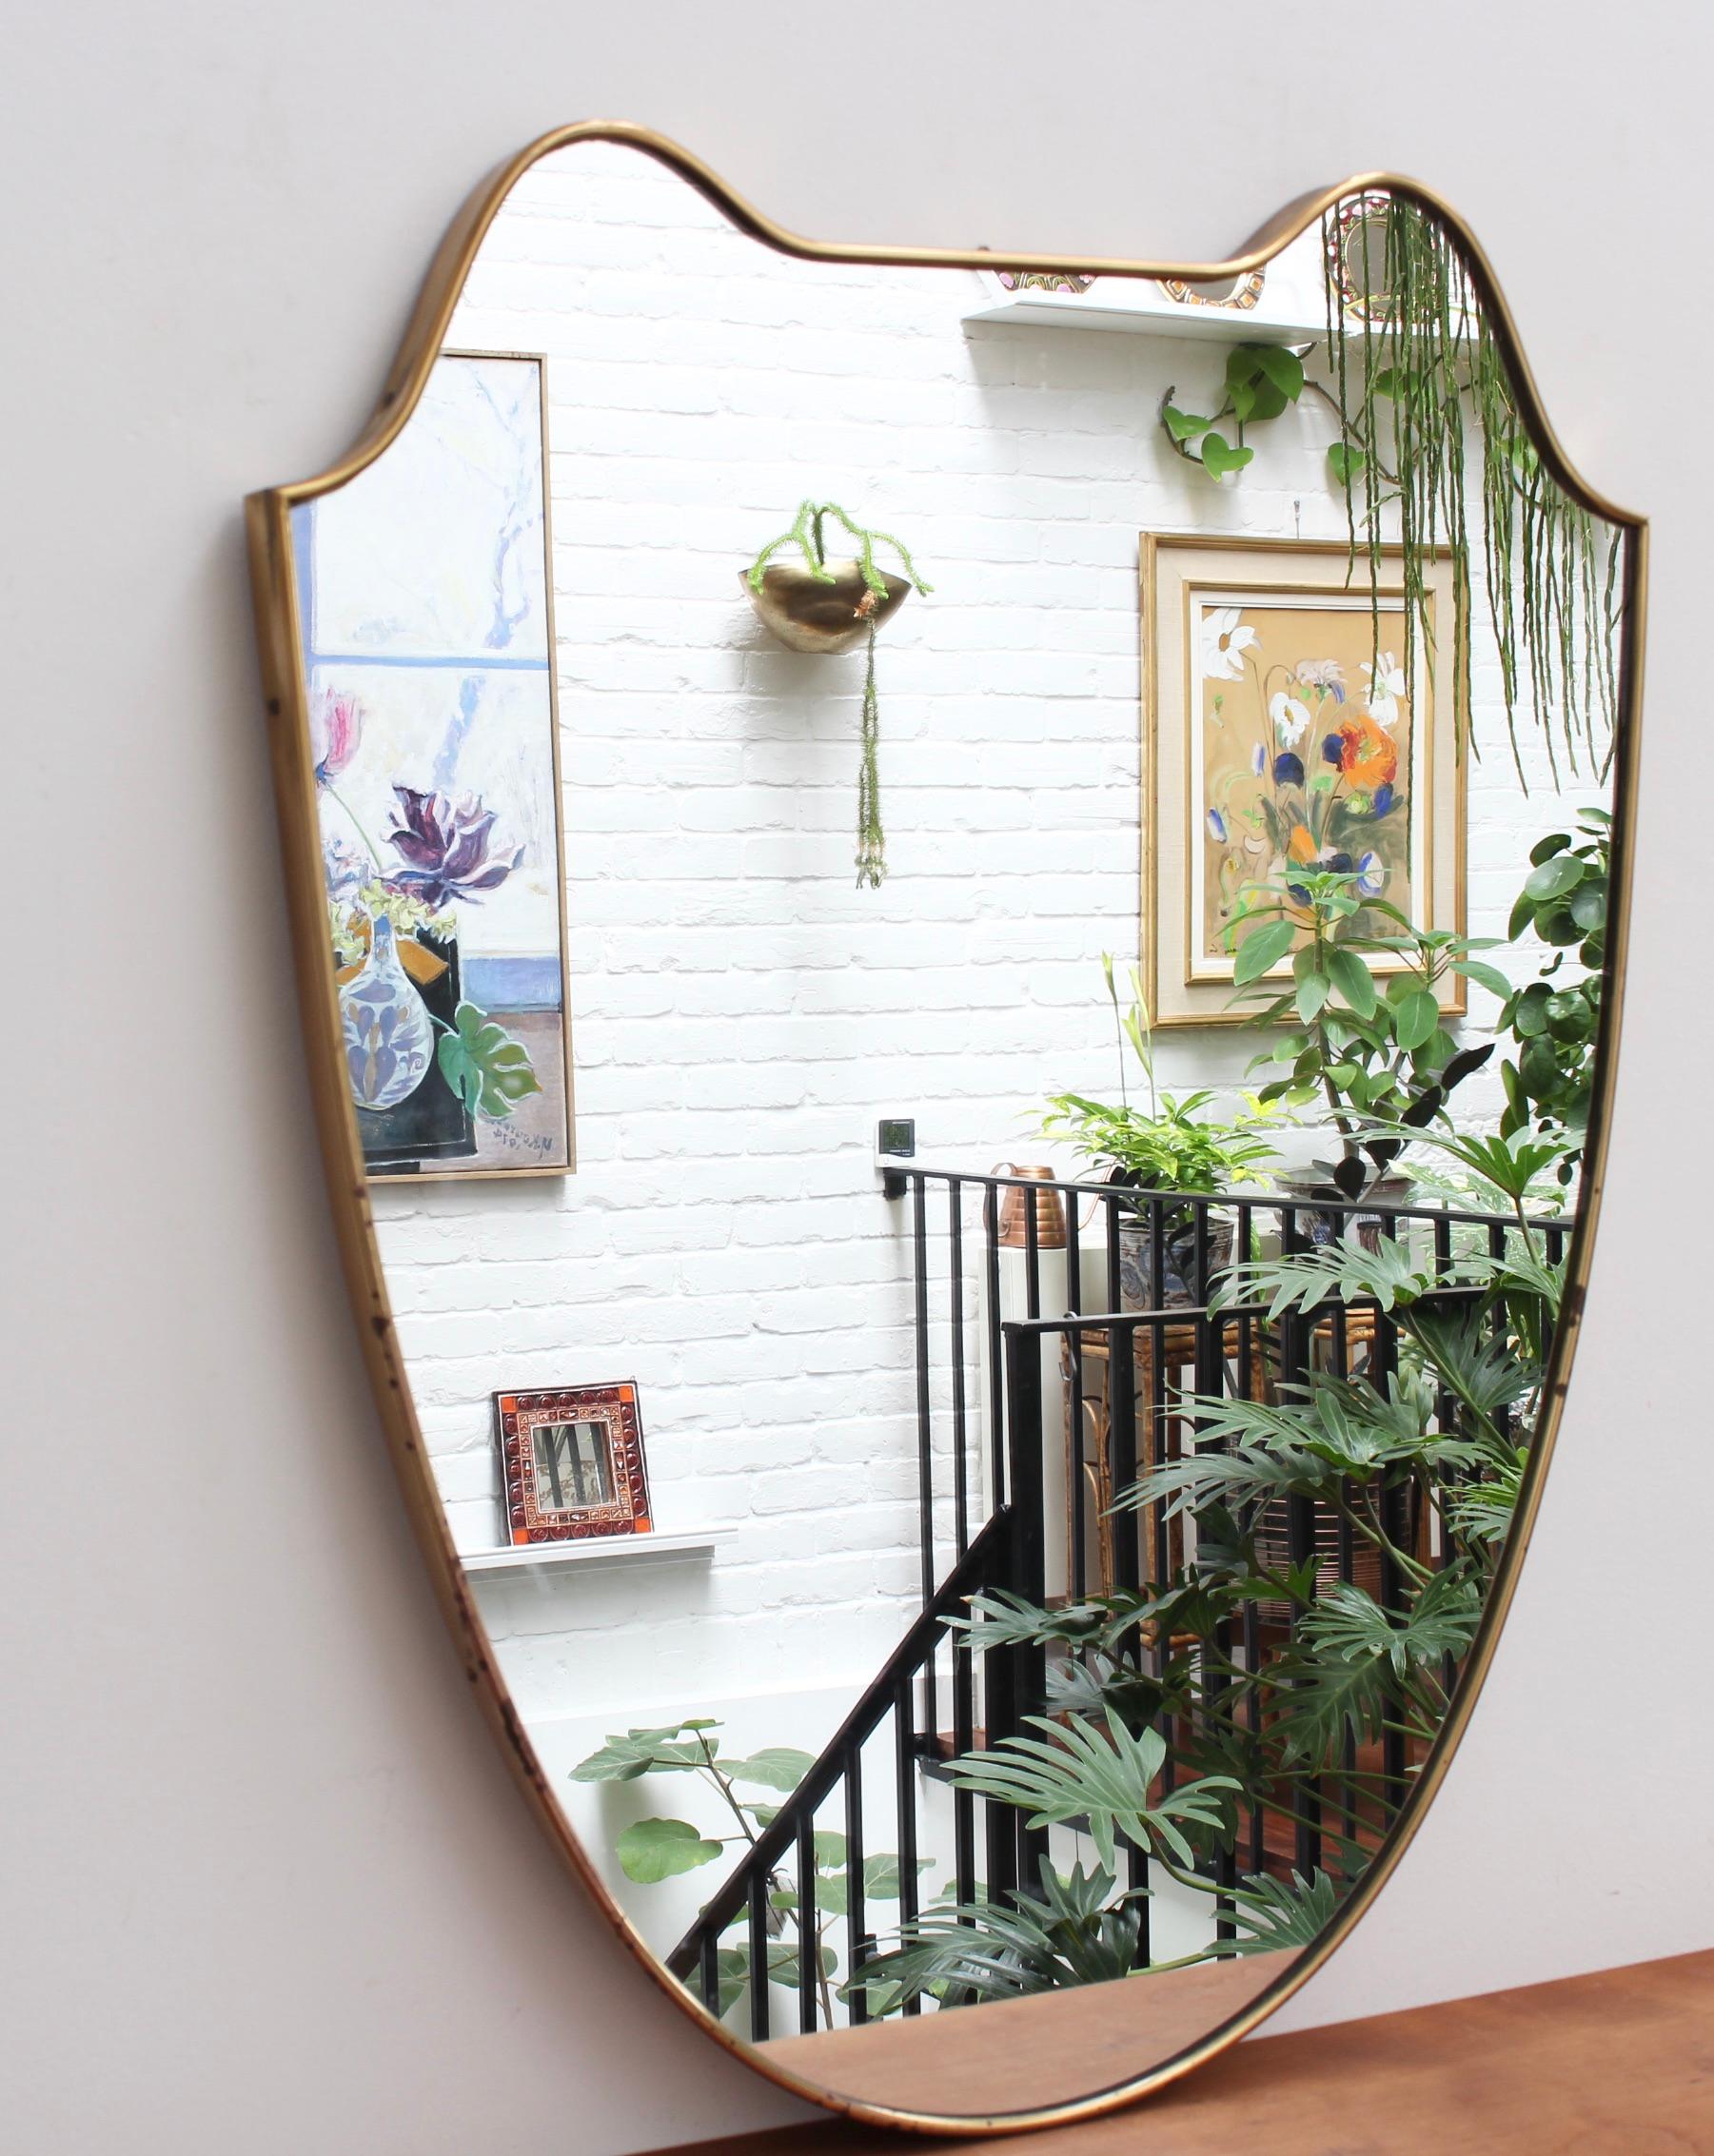 Vintage Italian wall mirror with brass frame, (circa 1950s). The crest-shaped mirror is substantial with sensuous curves crowning the piece. It exudes character, solidity, weightiness and has eye-catching good looks. Two 'ears' give the mirror a